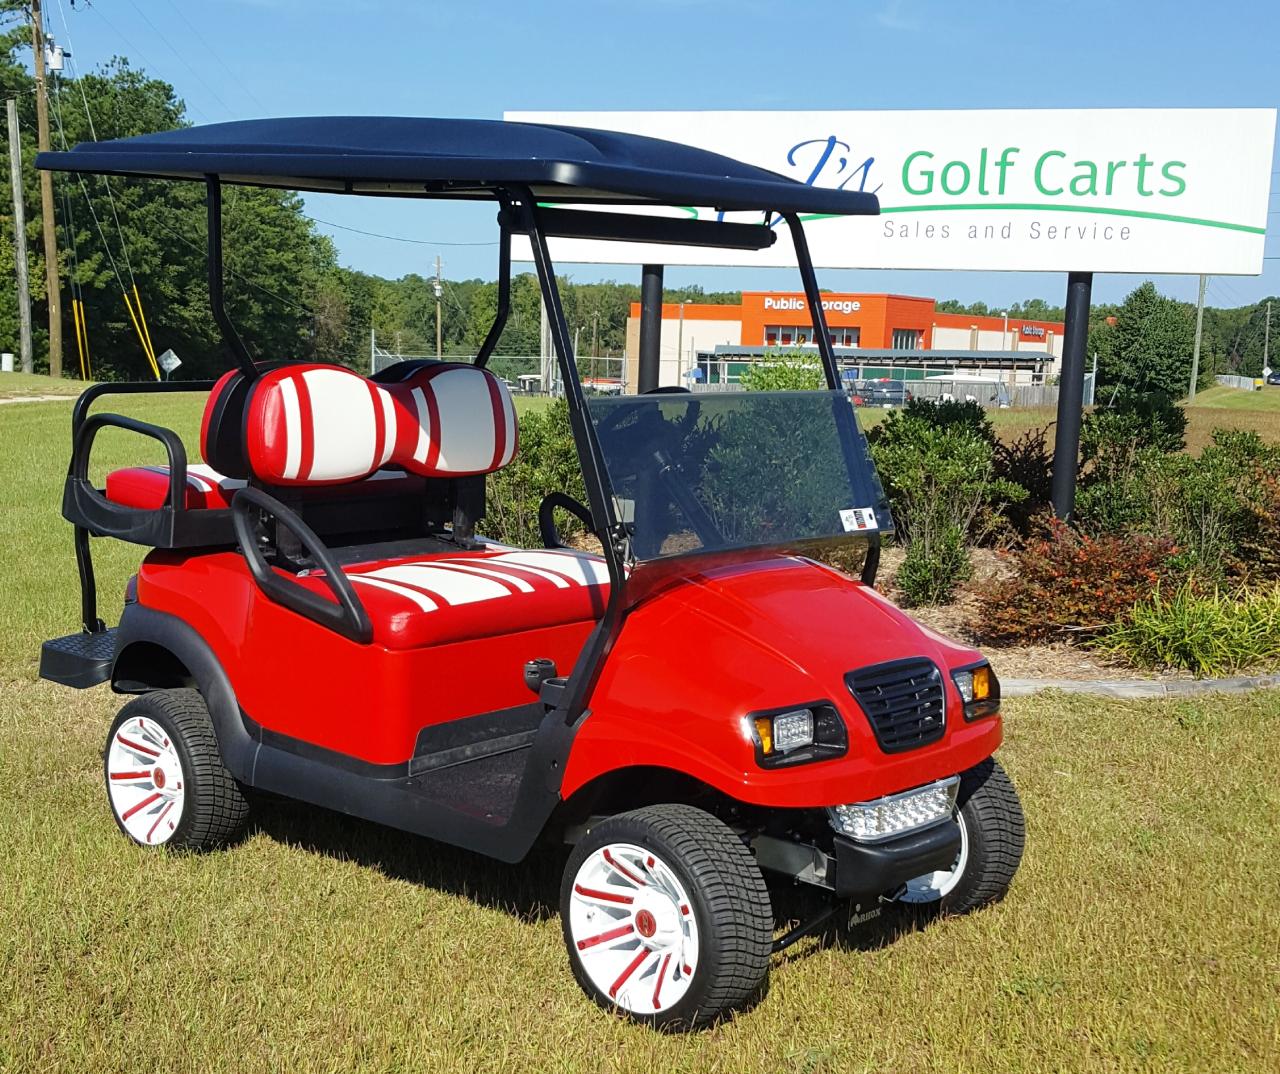 Used Golf Carts for Sale by Owner in Arlington, Virginia: Find Your Perfect Ride Today!